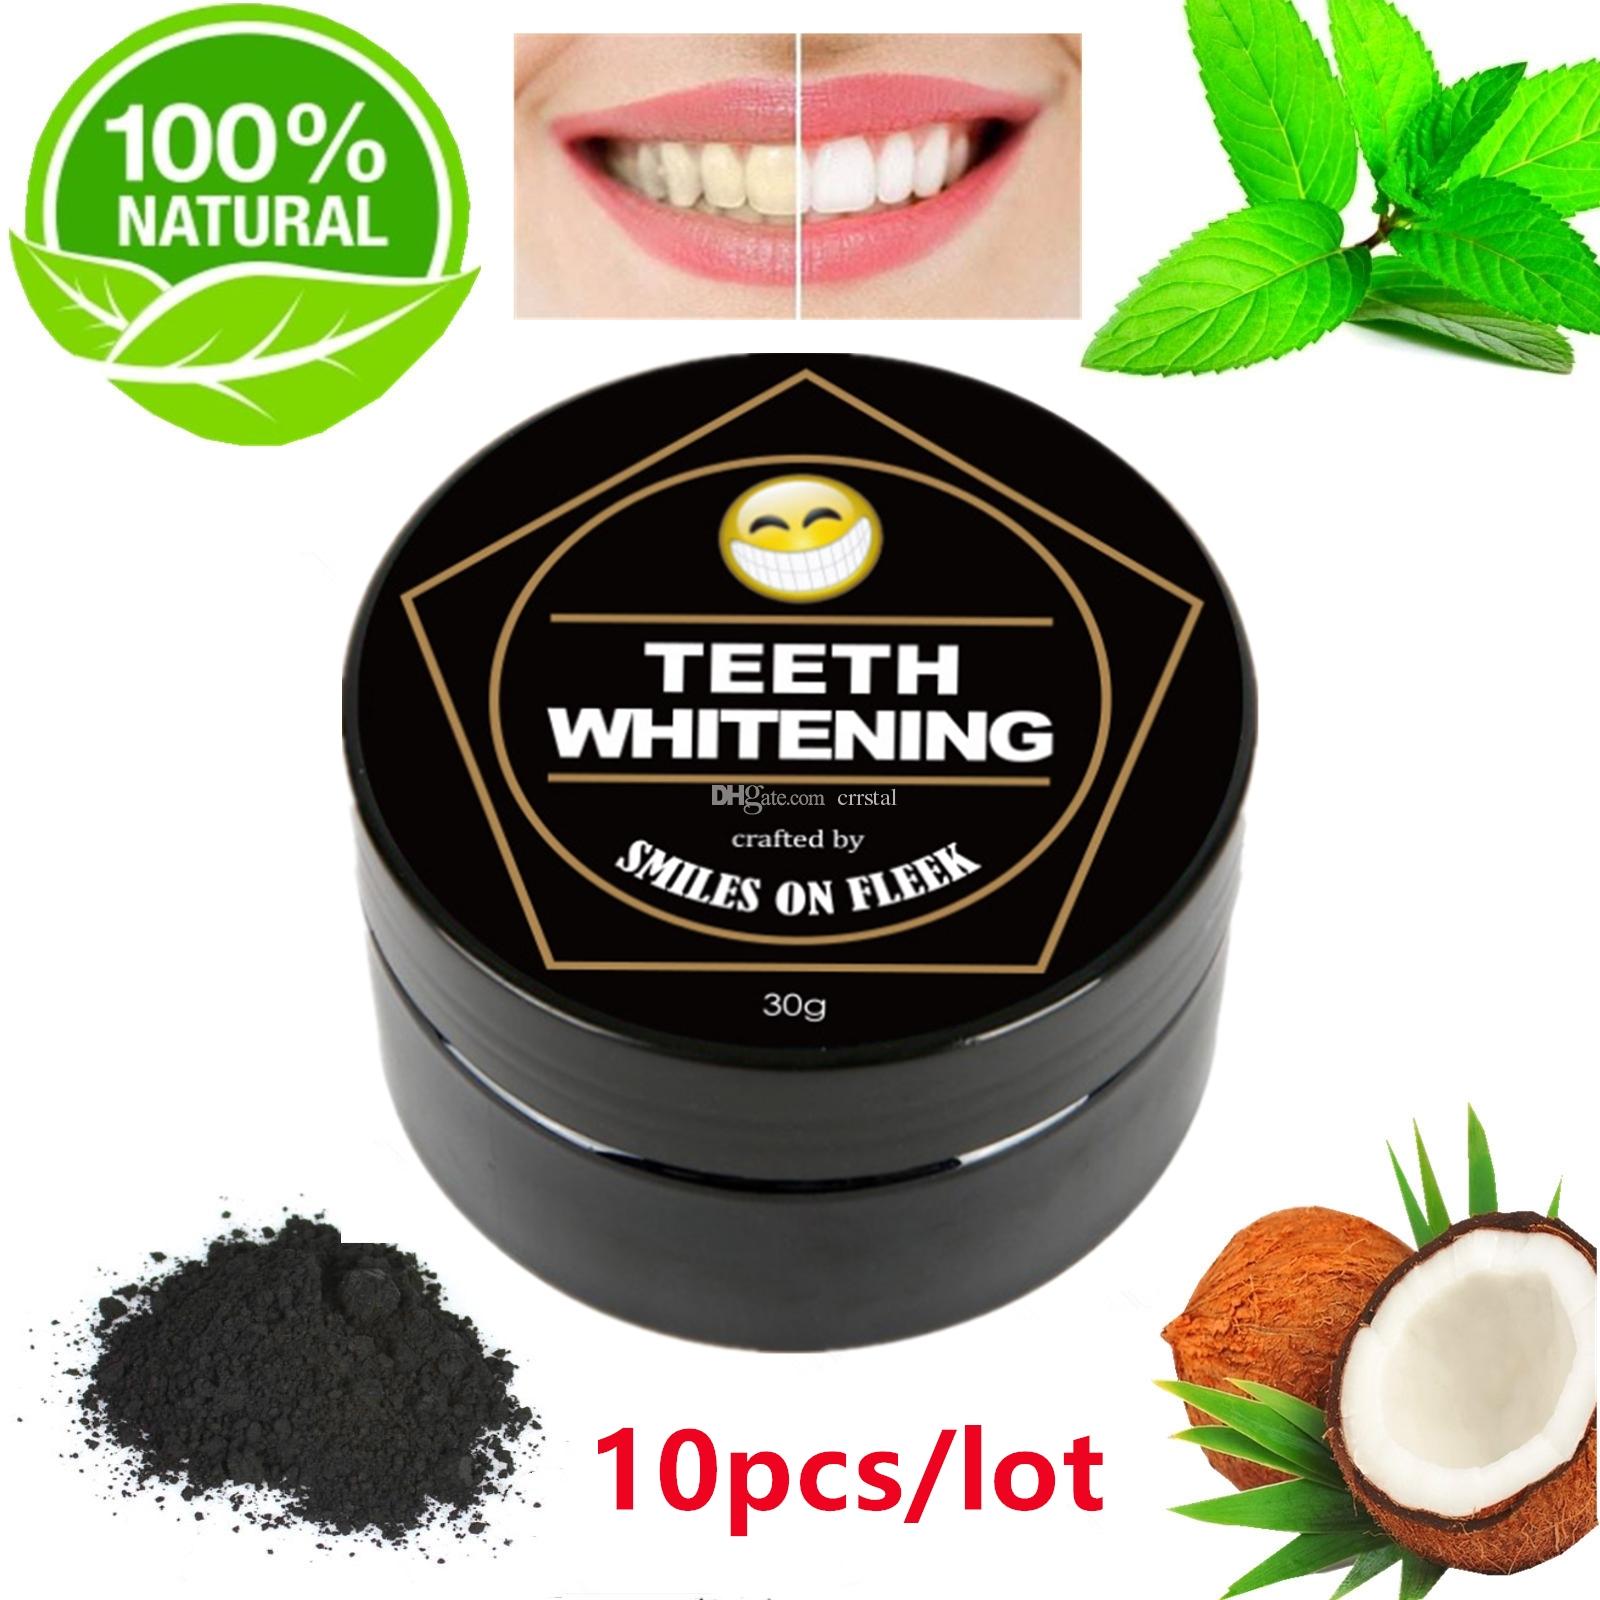 10pcs/lot Teeth Whitening Powder Oral Hygiene Cleaning Organic Nature Activated Bamboo Charcoal Powder Food Grade Oral Care 30g Dropshipping